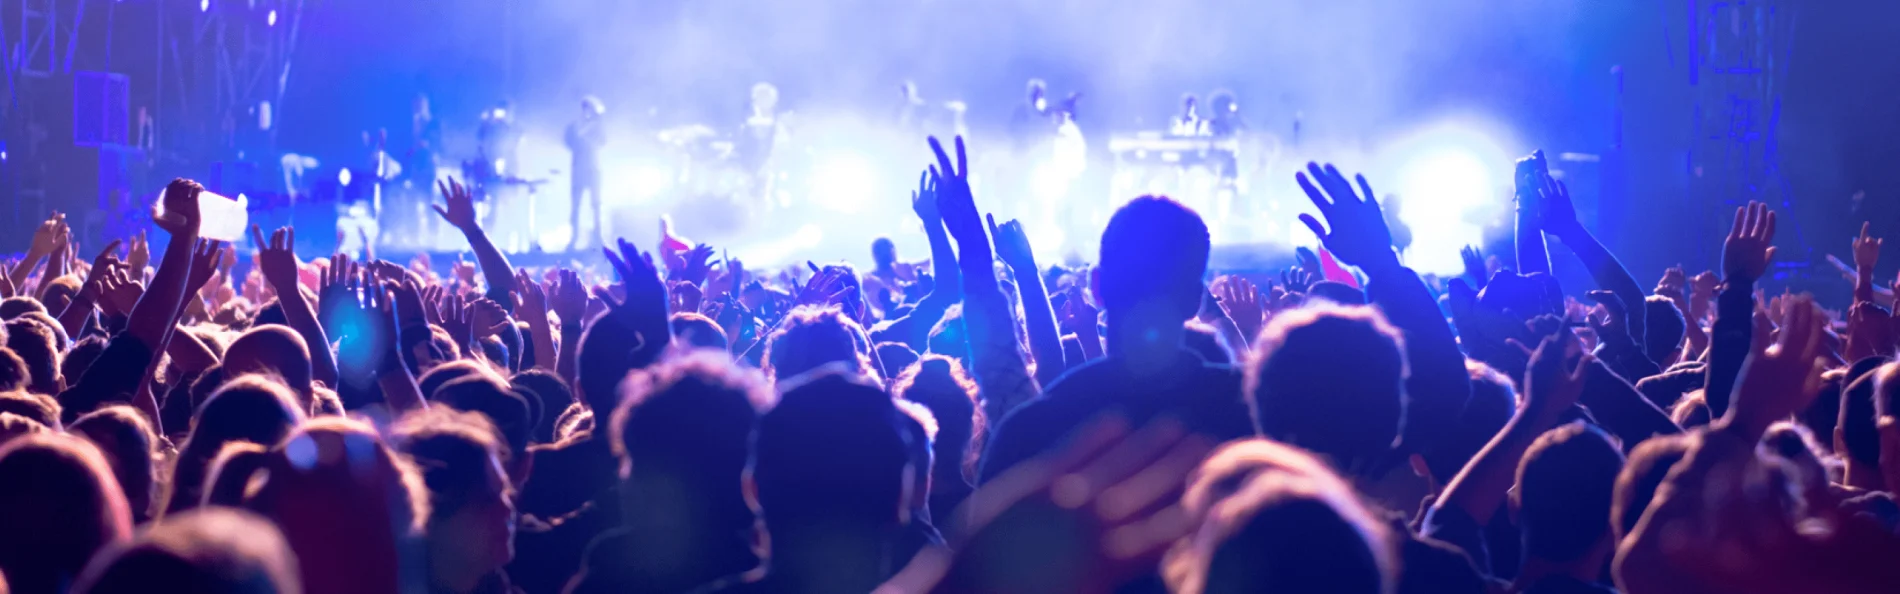 Image of many people at a concert